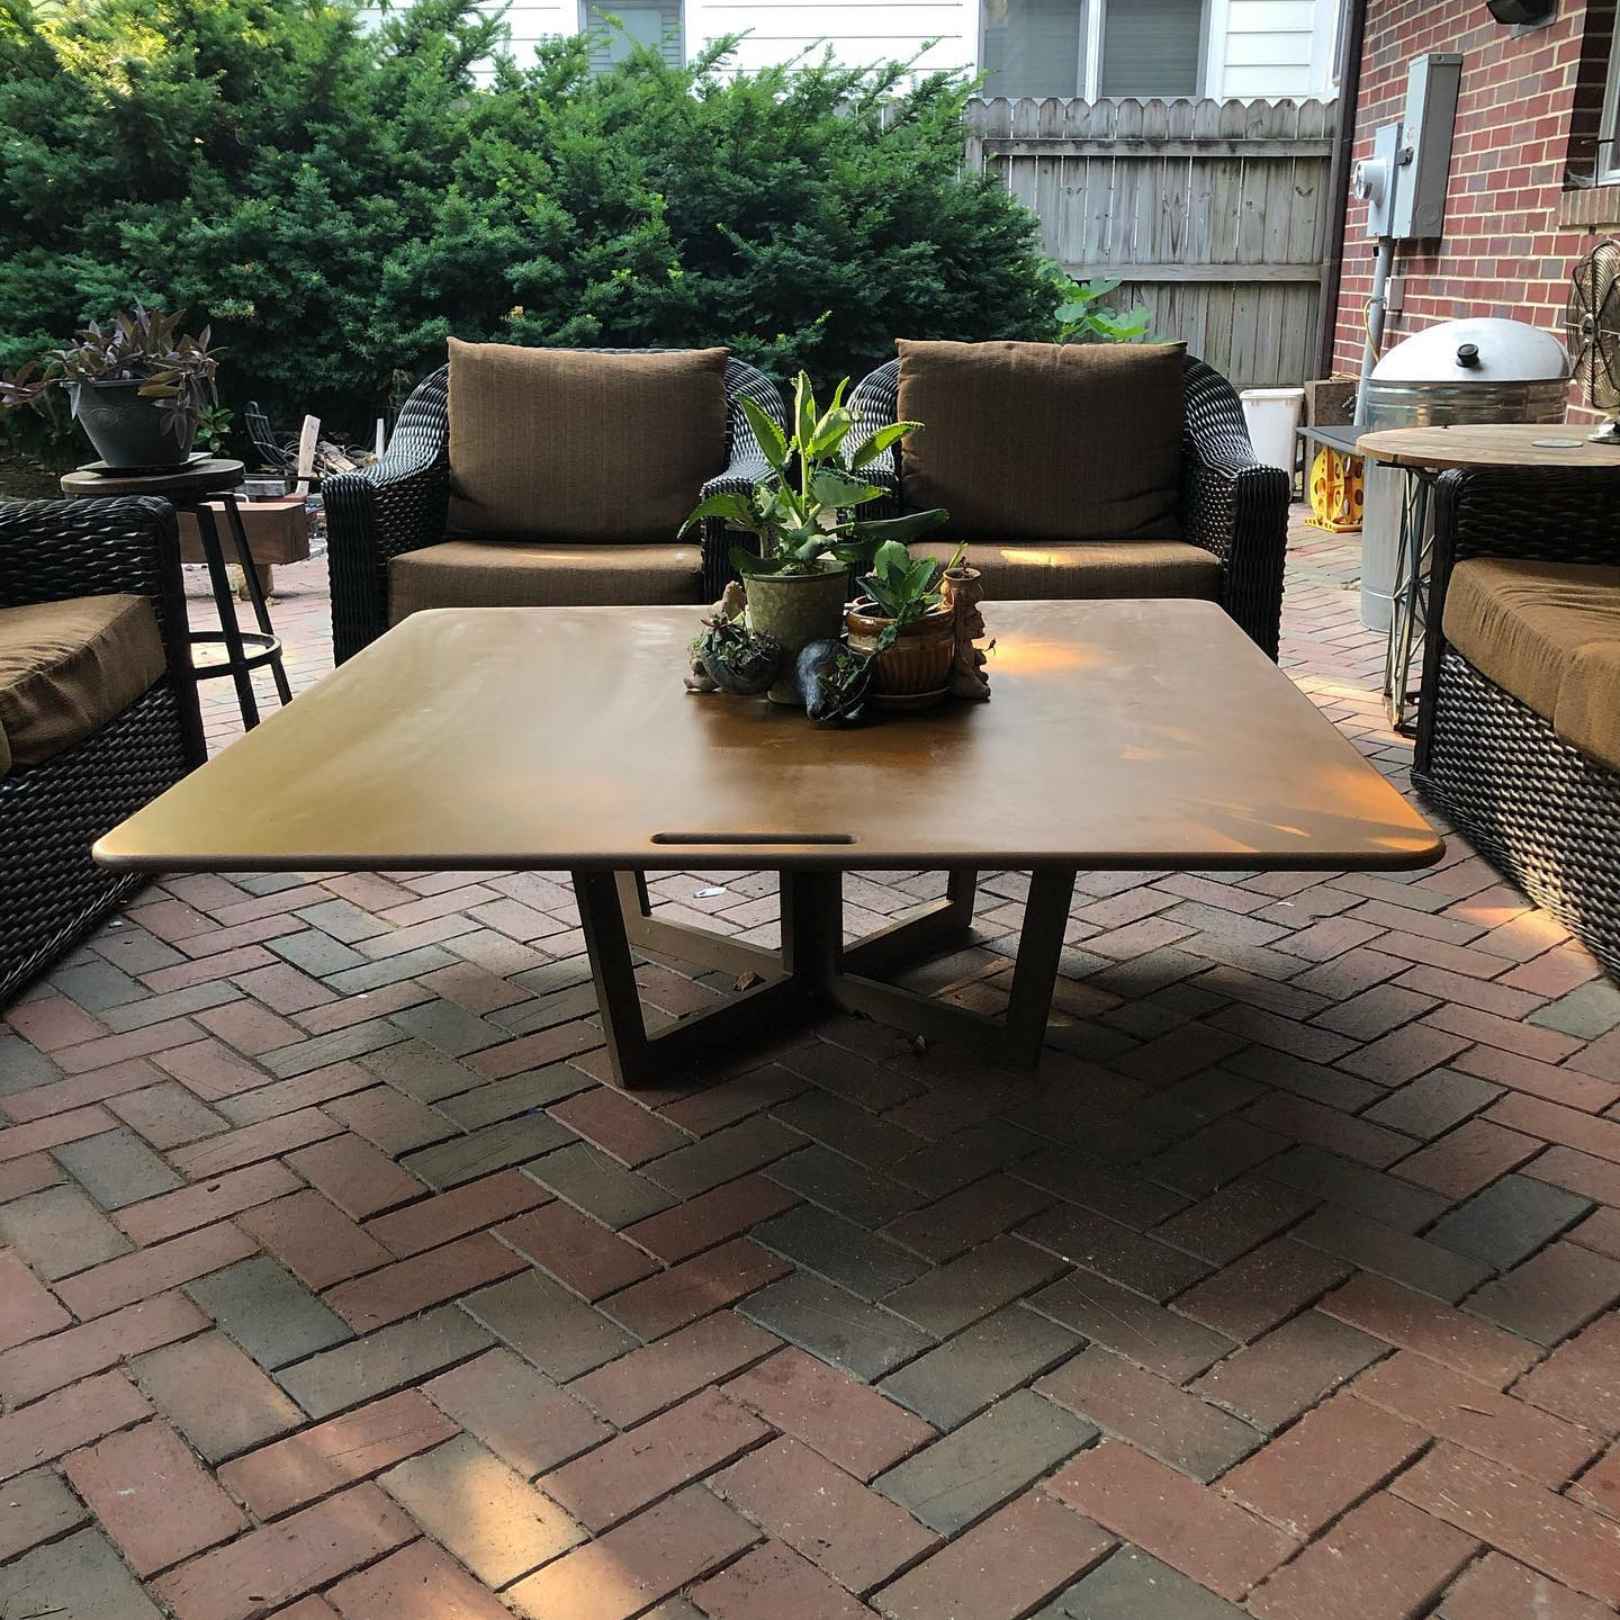 How To Turn An Indoor Table Into An Outdoor Table